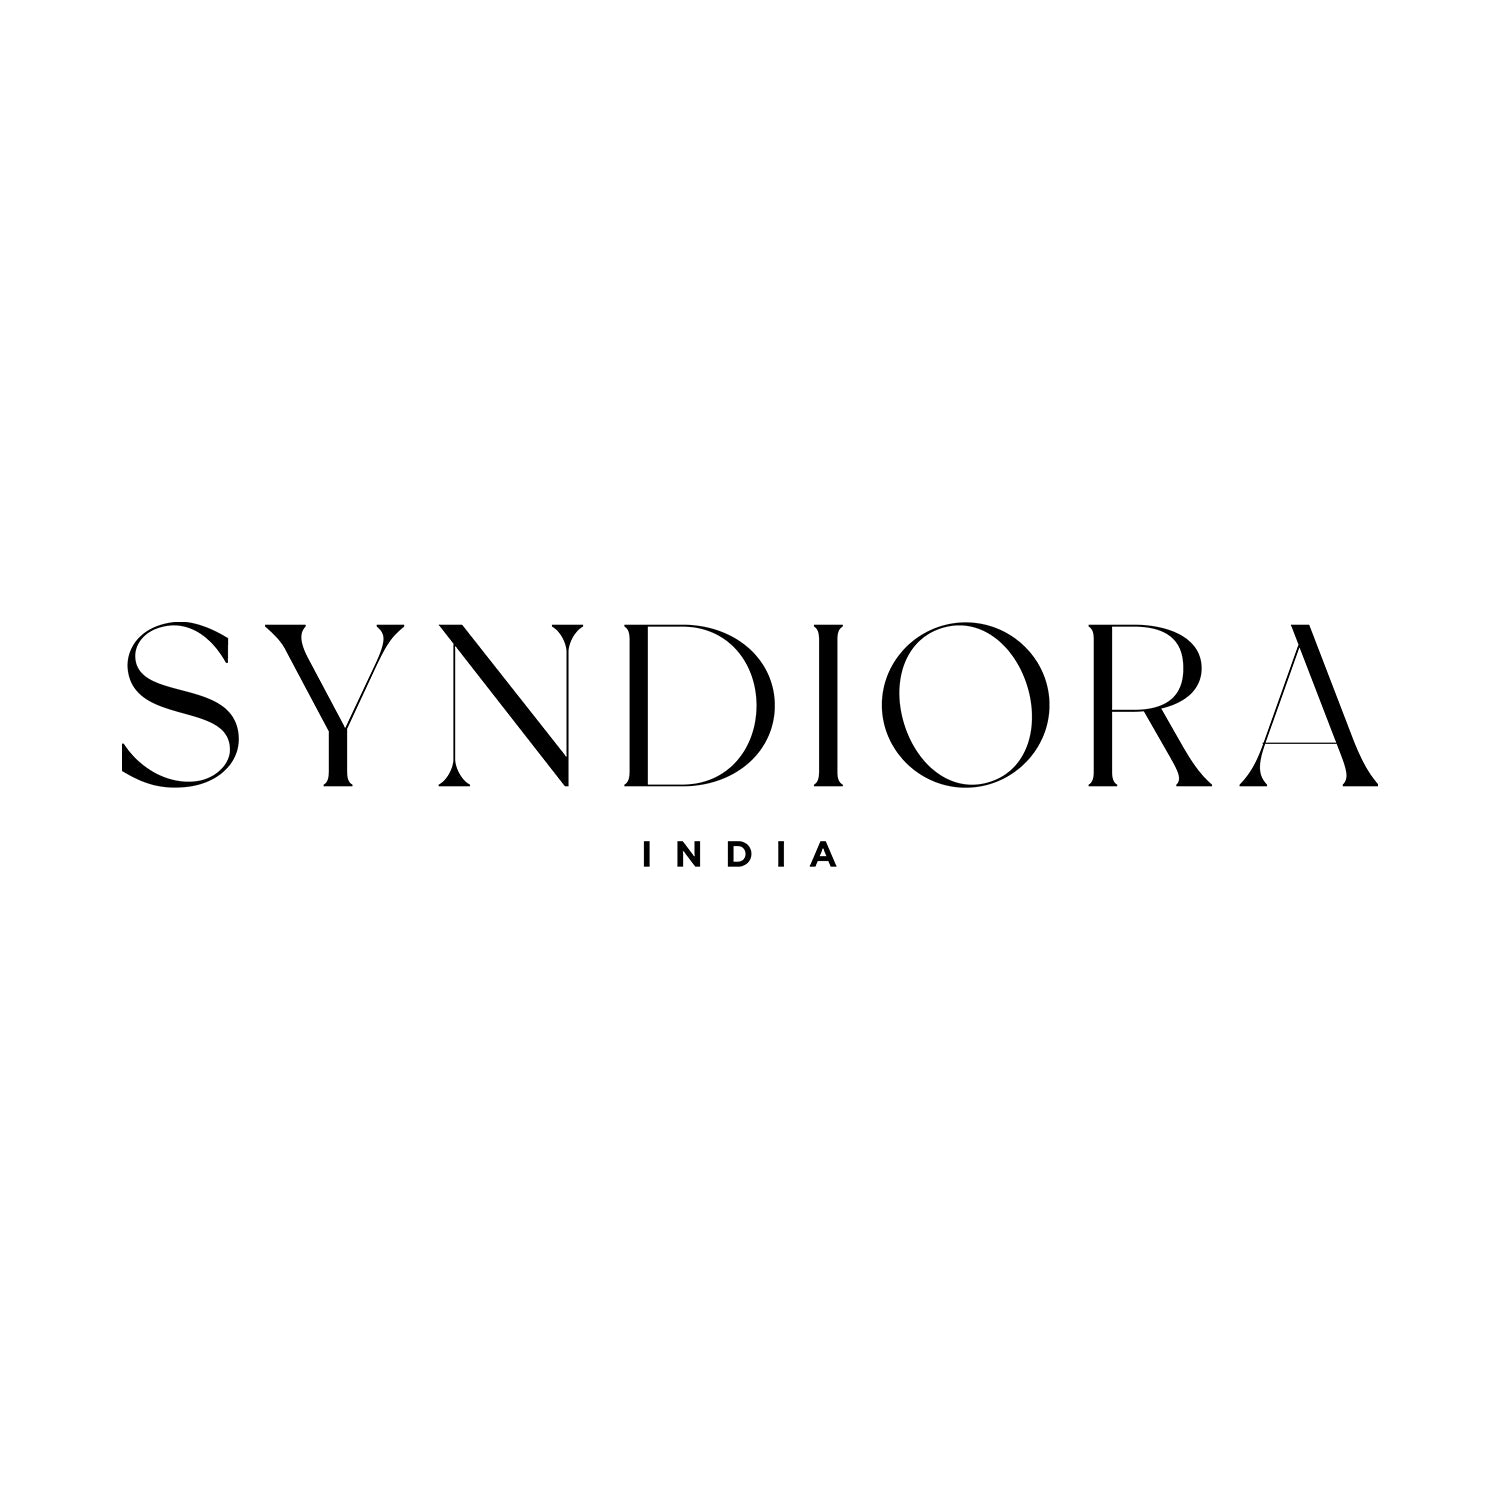 Gold Necklaces
– SYNDIORA
